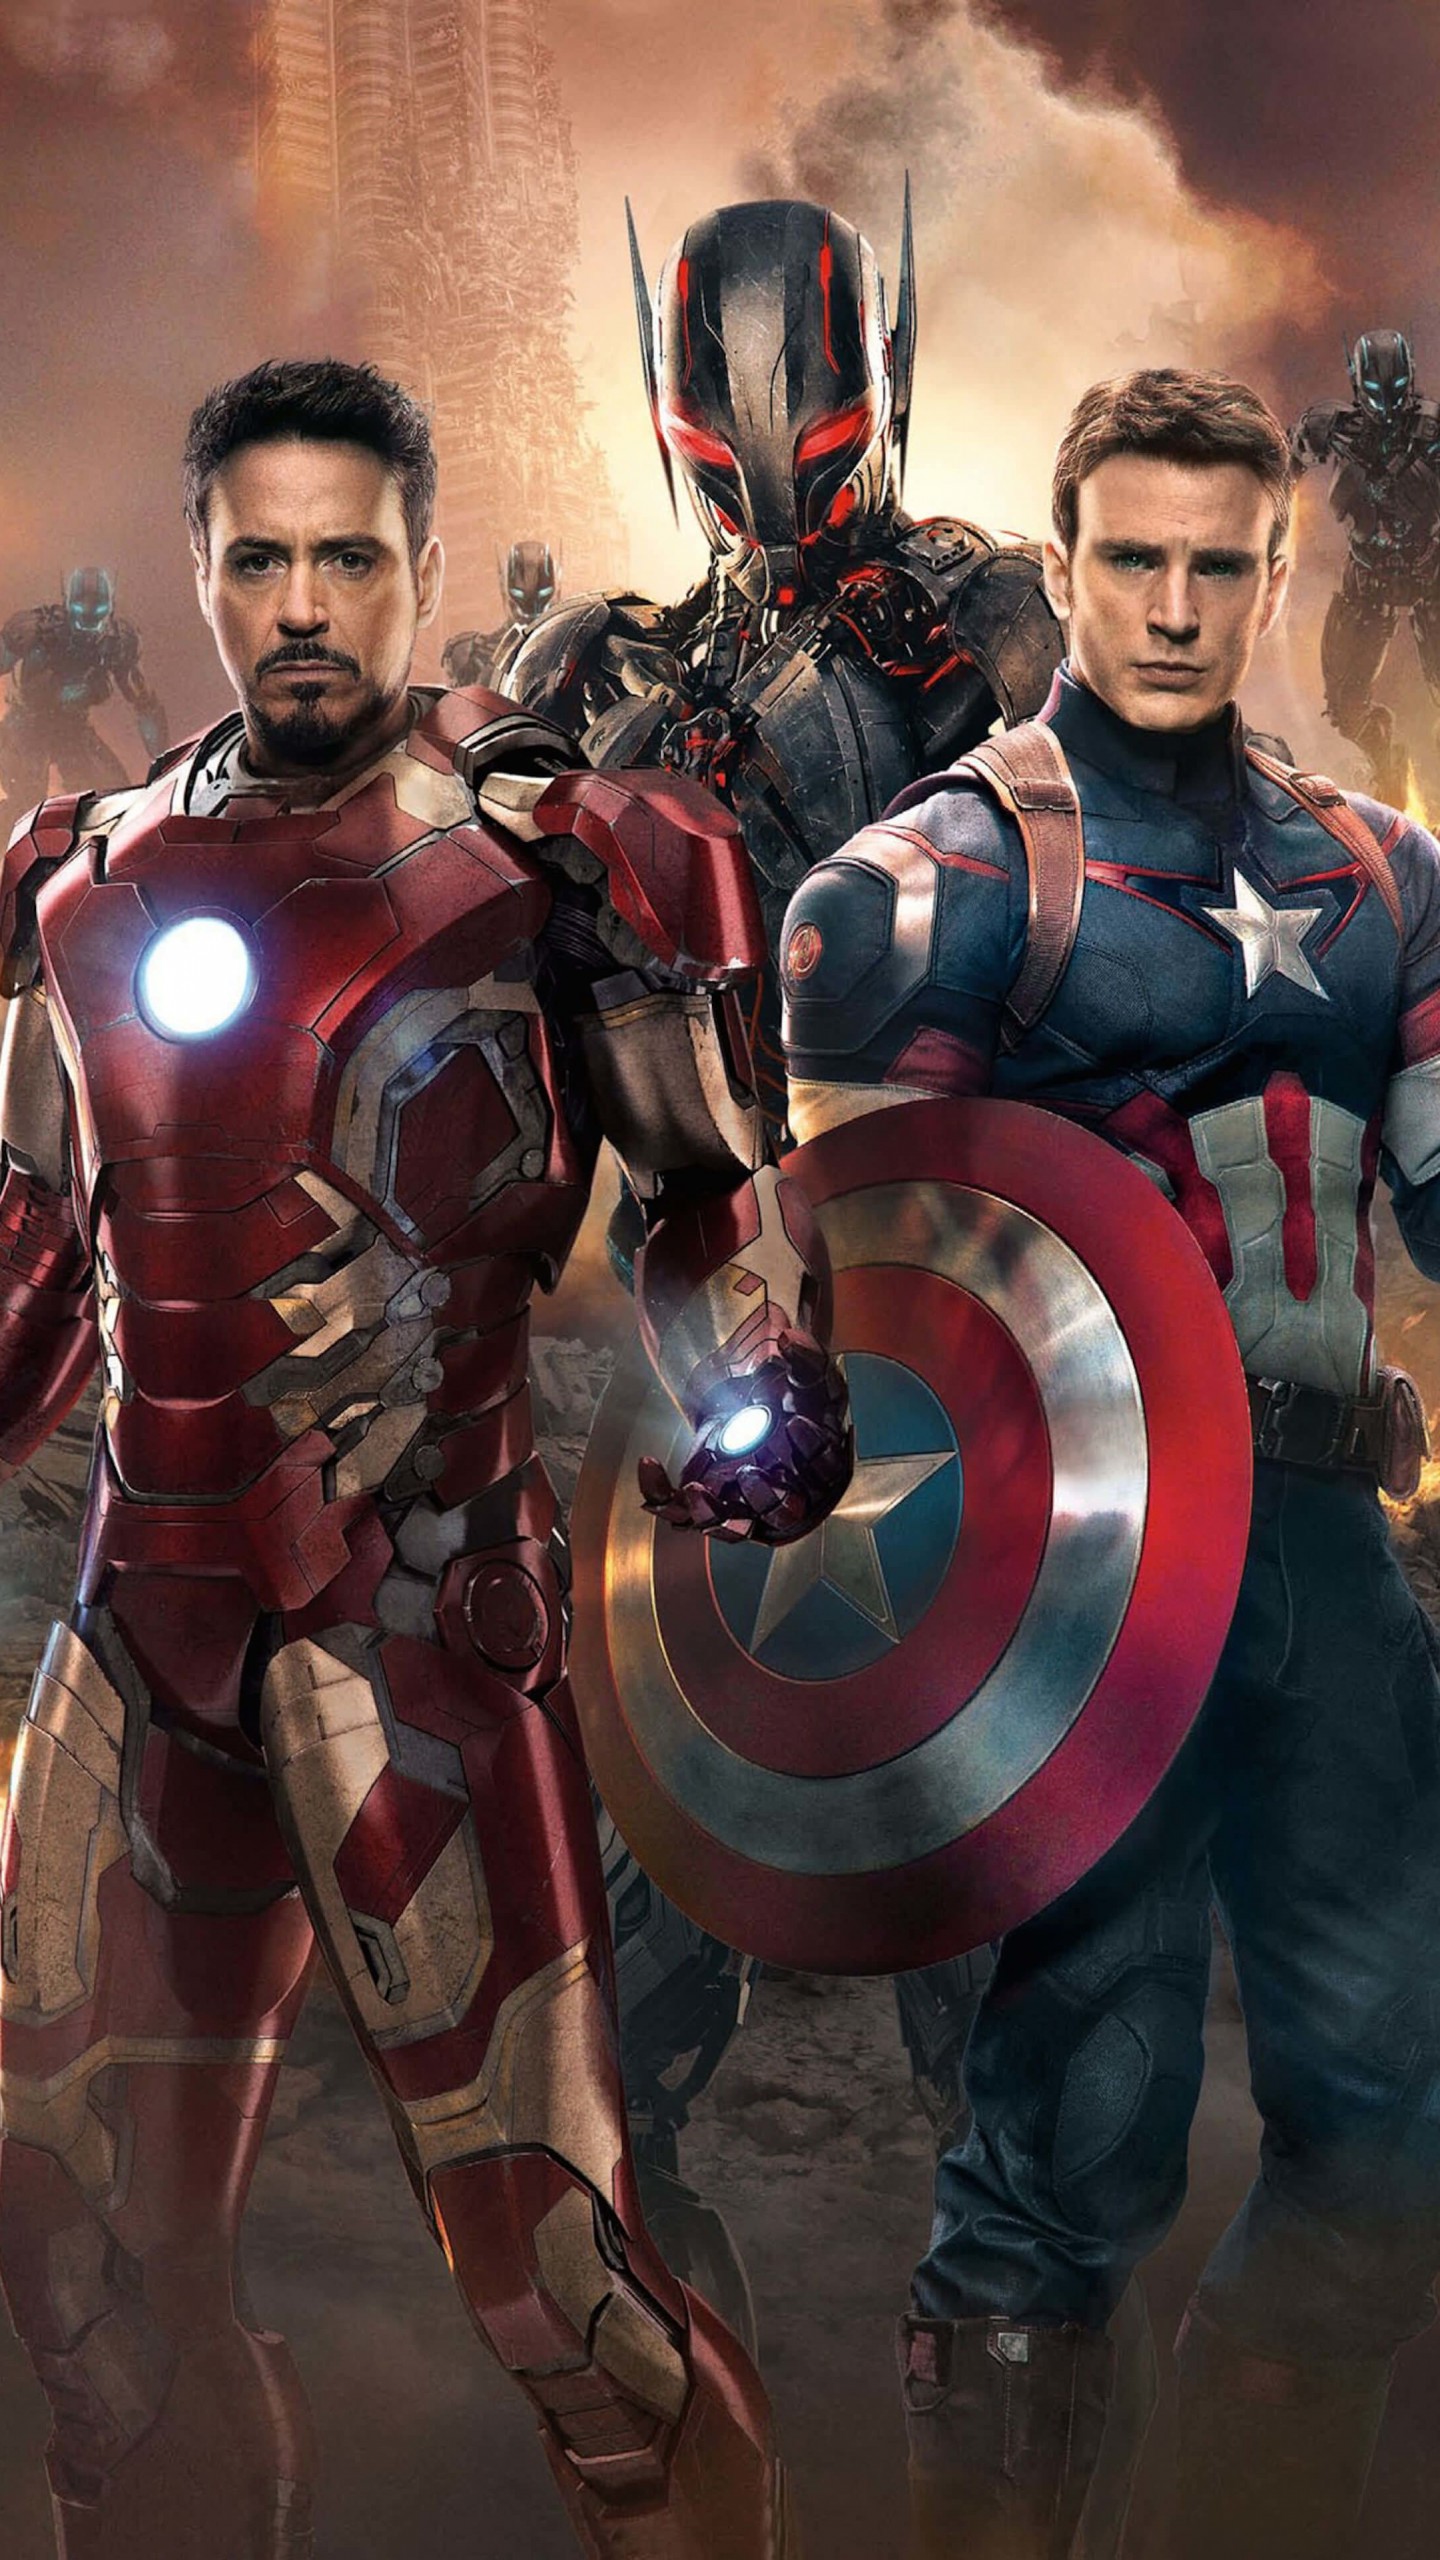 The Avengers: Age of Ultron - Iron Man and Captain America Wallpaper for SAMSUNG Galaxy Note 4